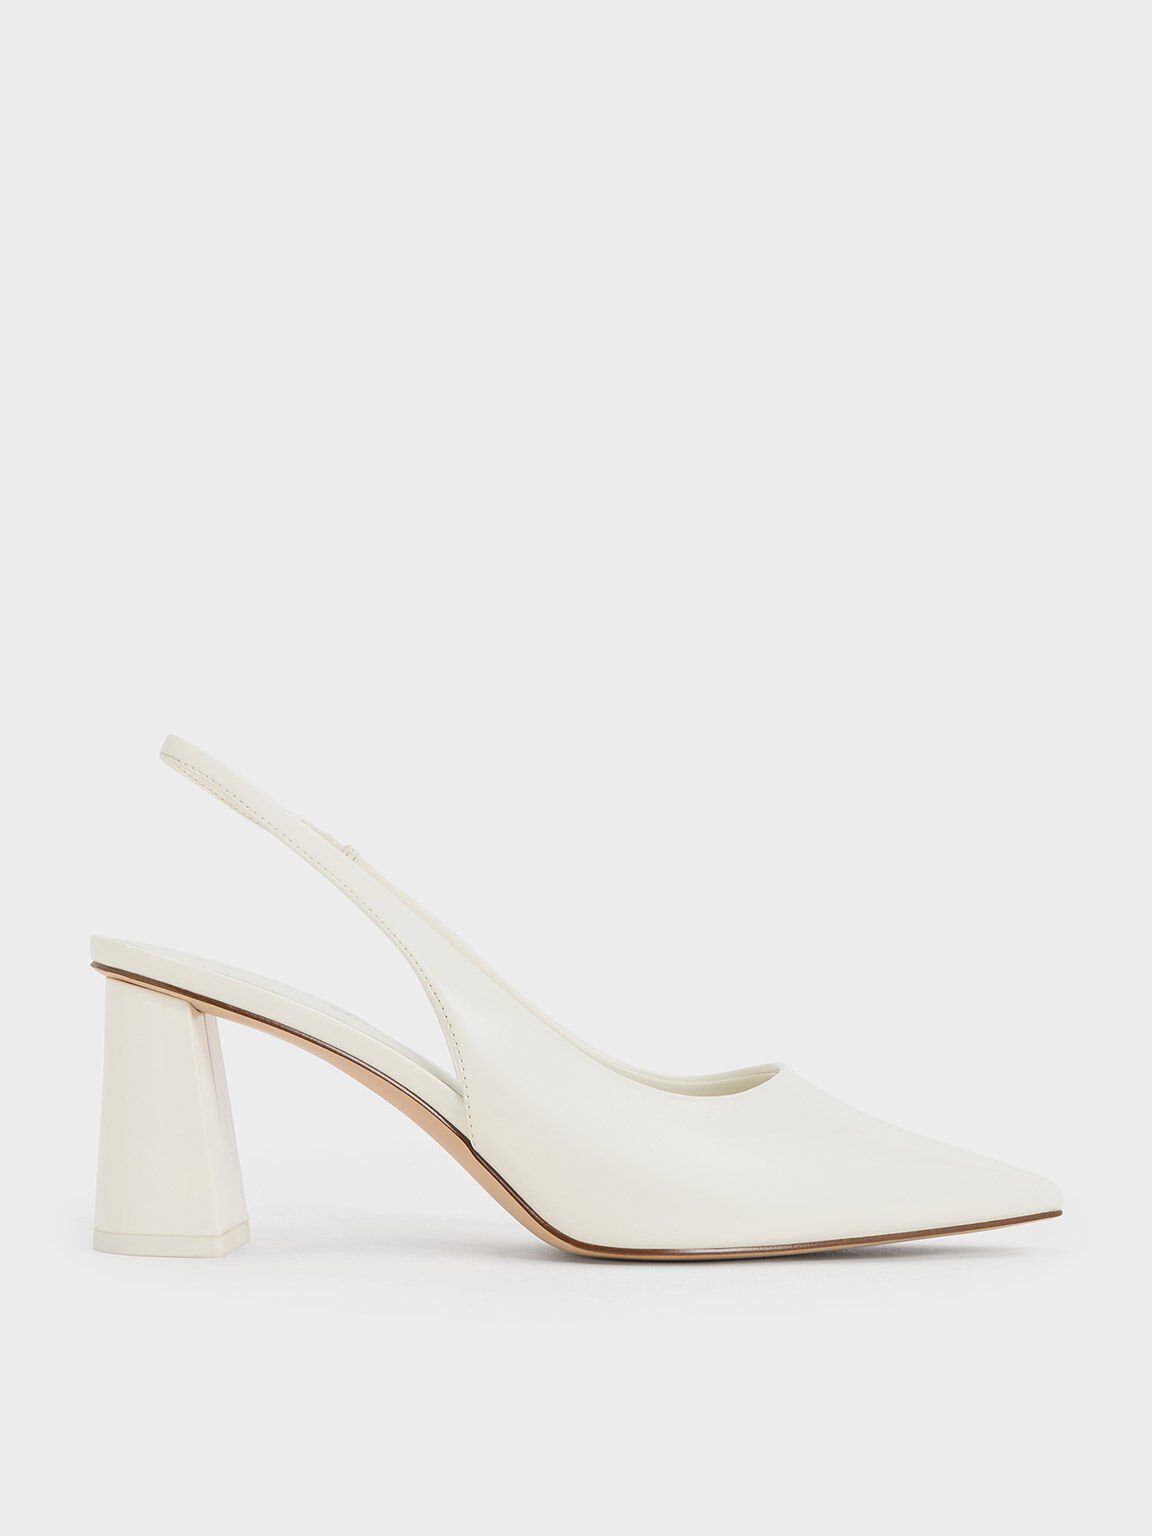 Buy Shoetopia High Heels Solid Patent White Pumps For Women And Girls Online